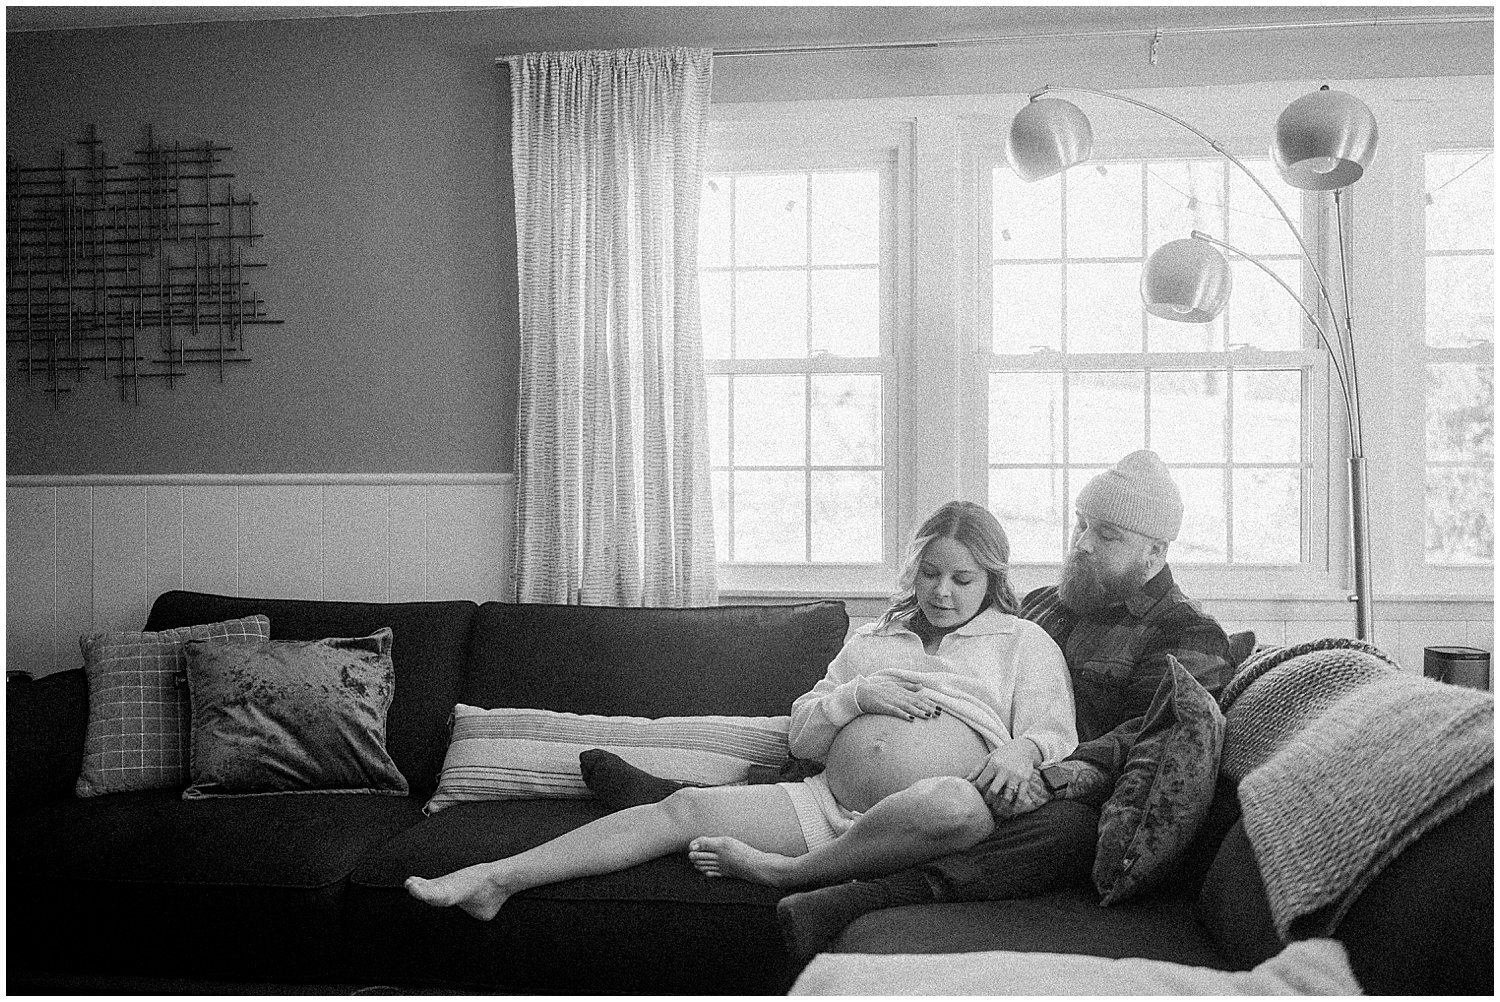 In-Home Lifestyle Maternity Portraits | Centerville, Ohio